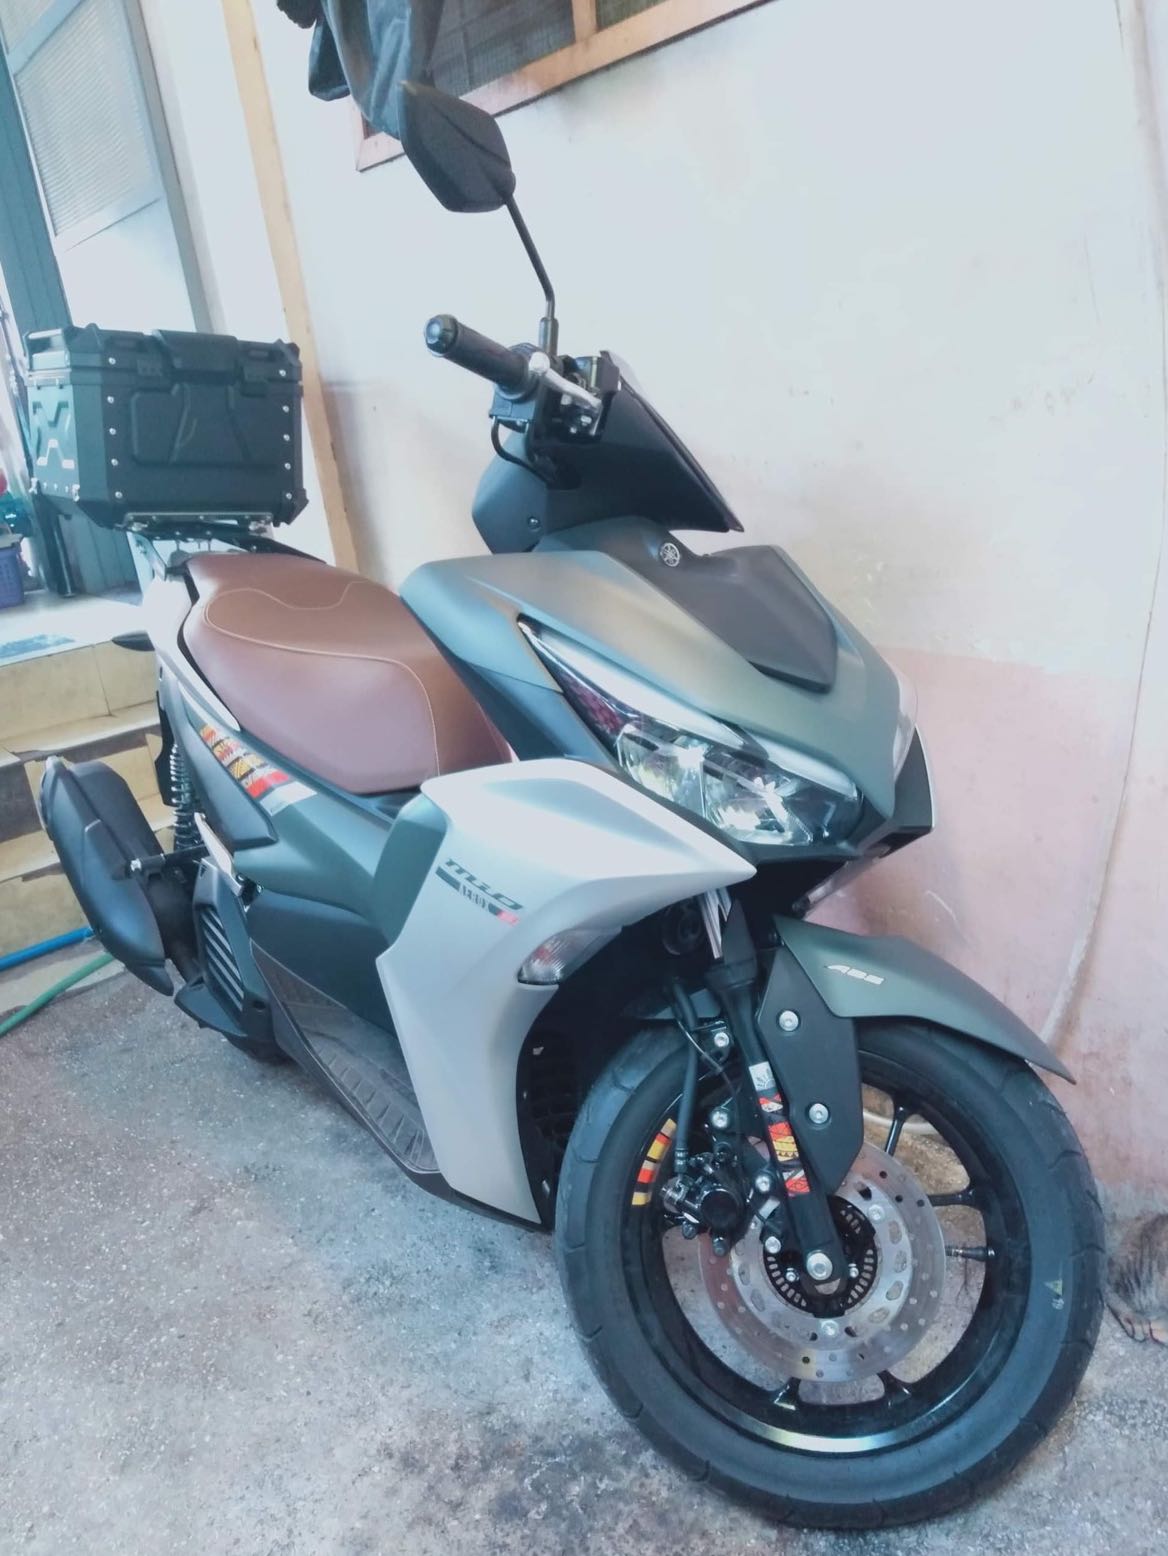 Repriced Yamaha Mio Aerox S V2 155 21 With Abs Findurtrip Edition Motorbikes Motorbikes For Sale On Carousell